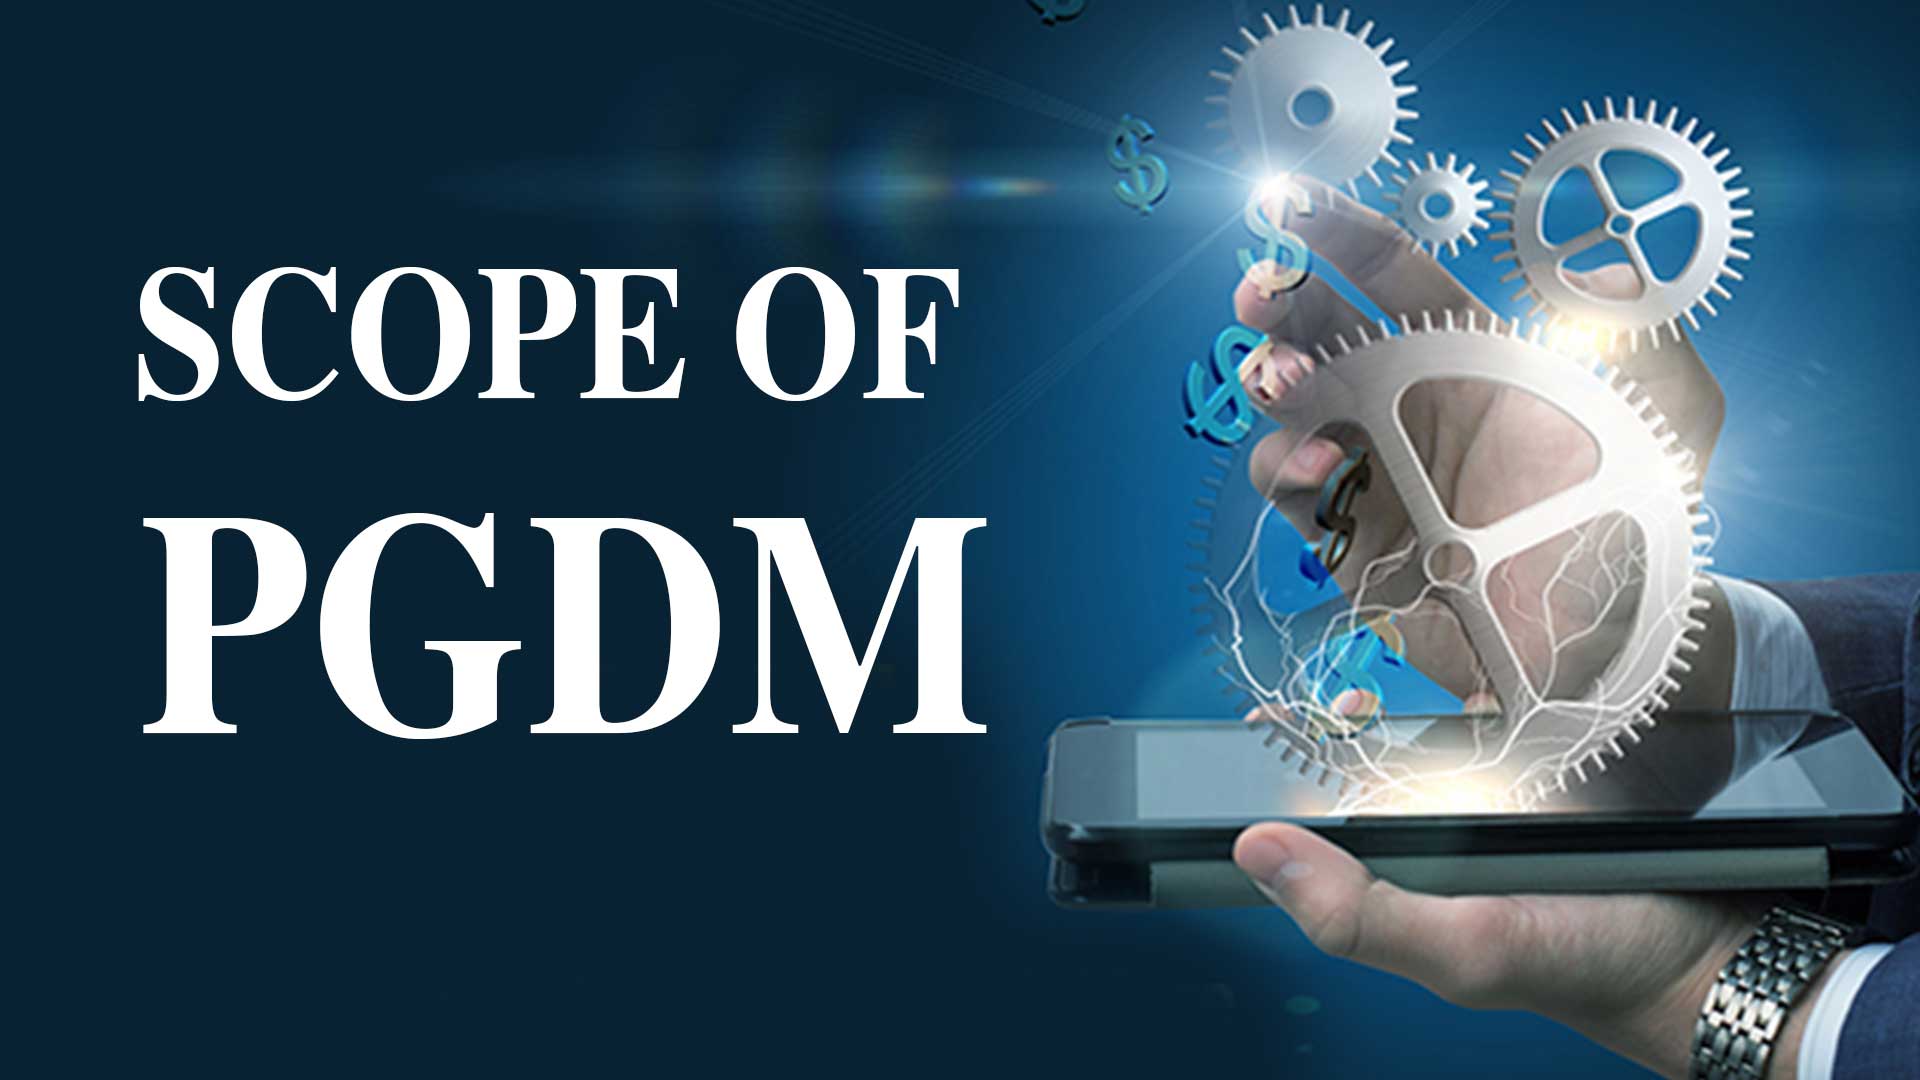 Scope of PGDM in today's world